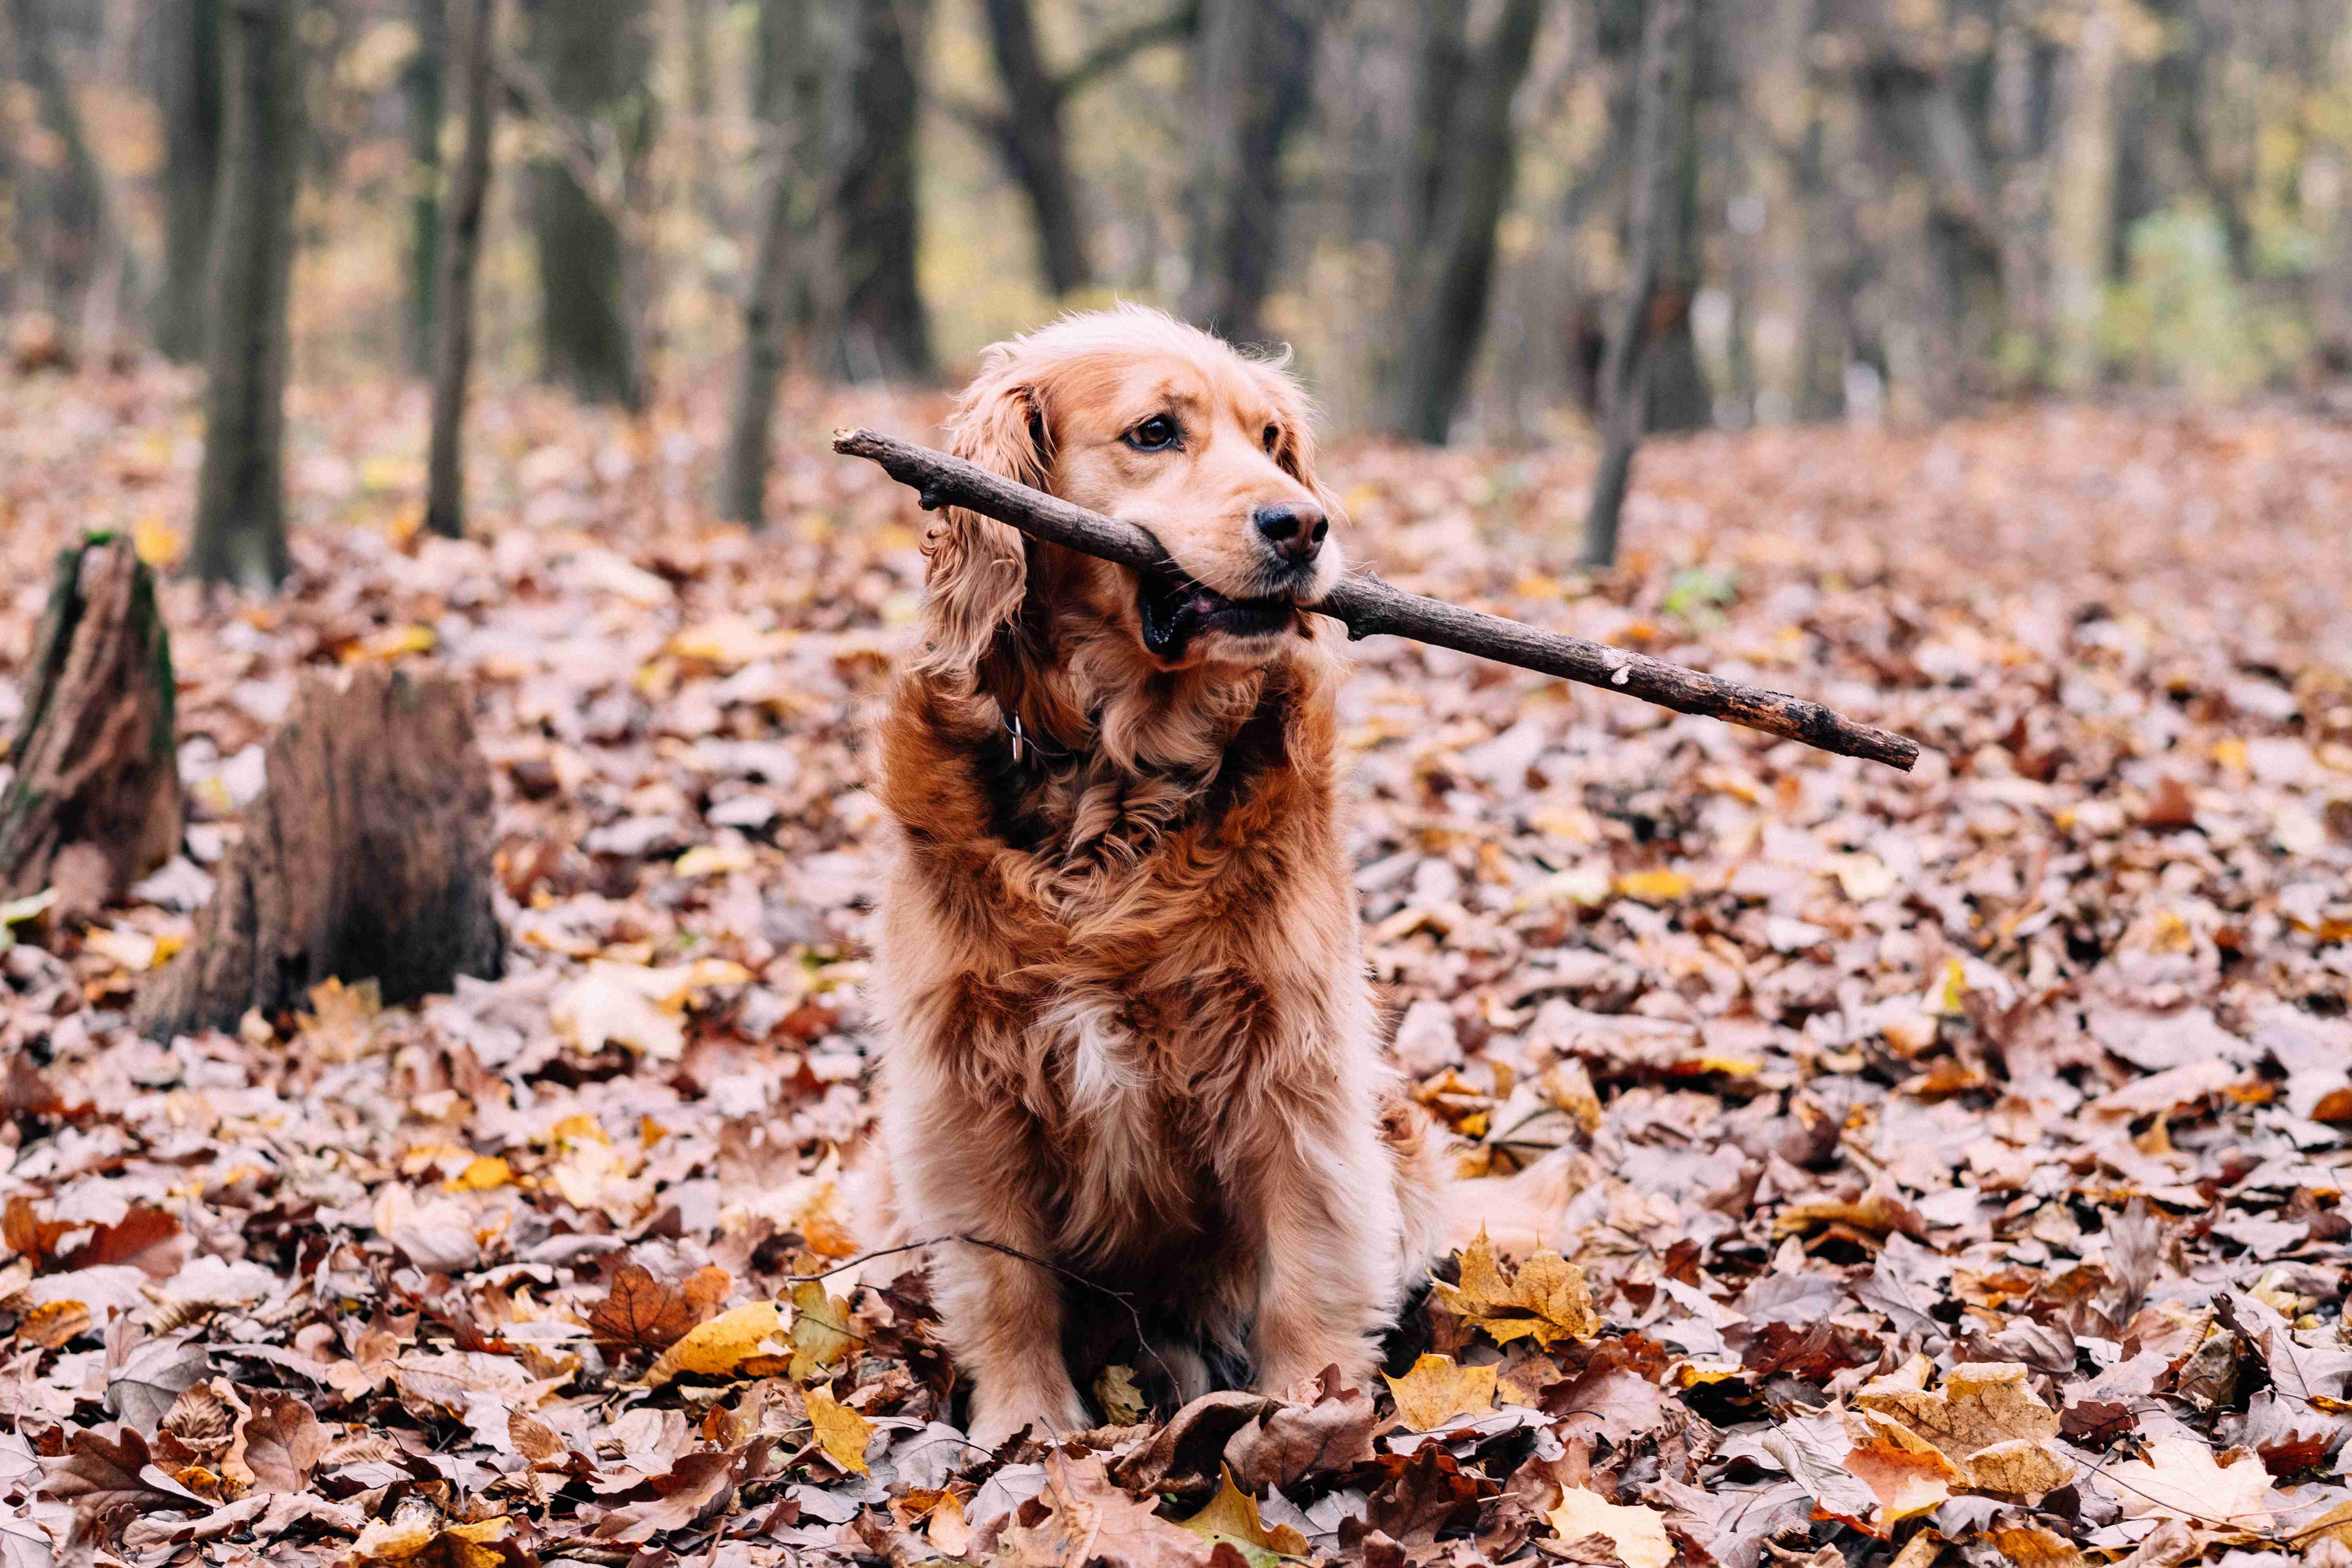 Can Golden Retrievers be prone to obesity?